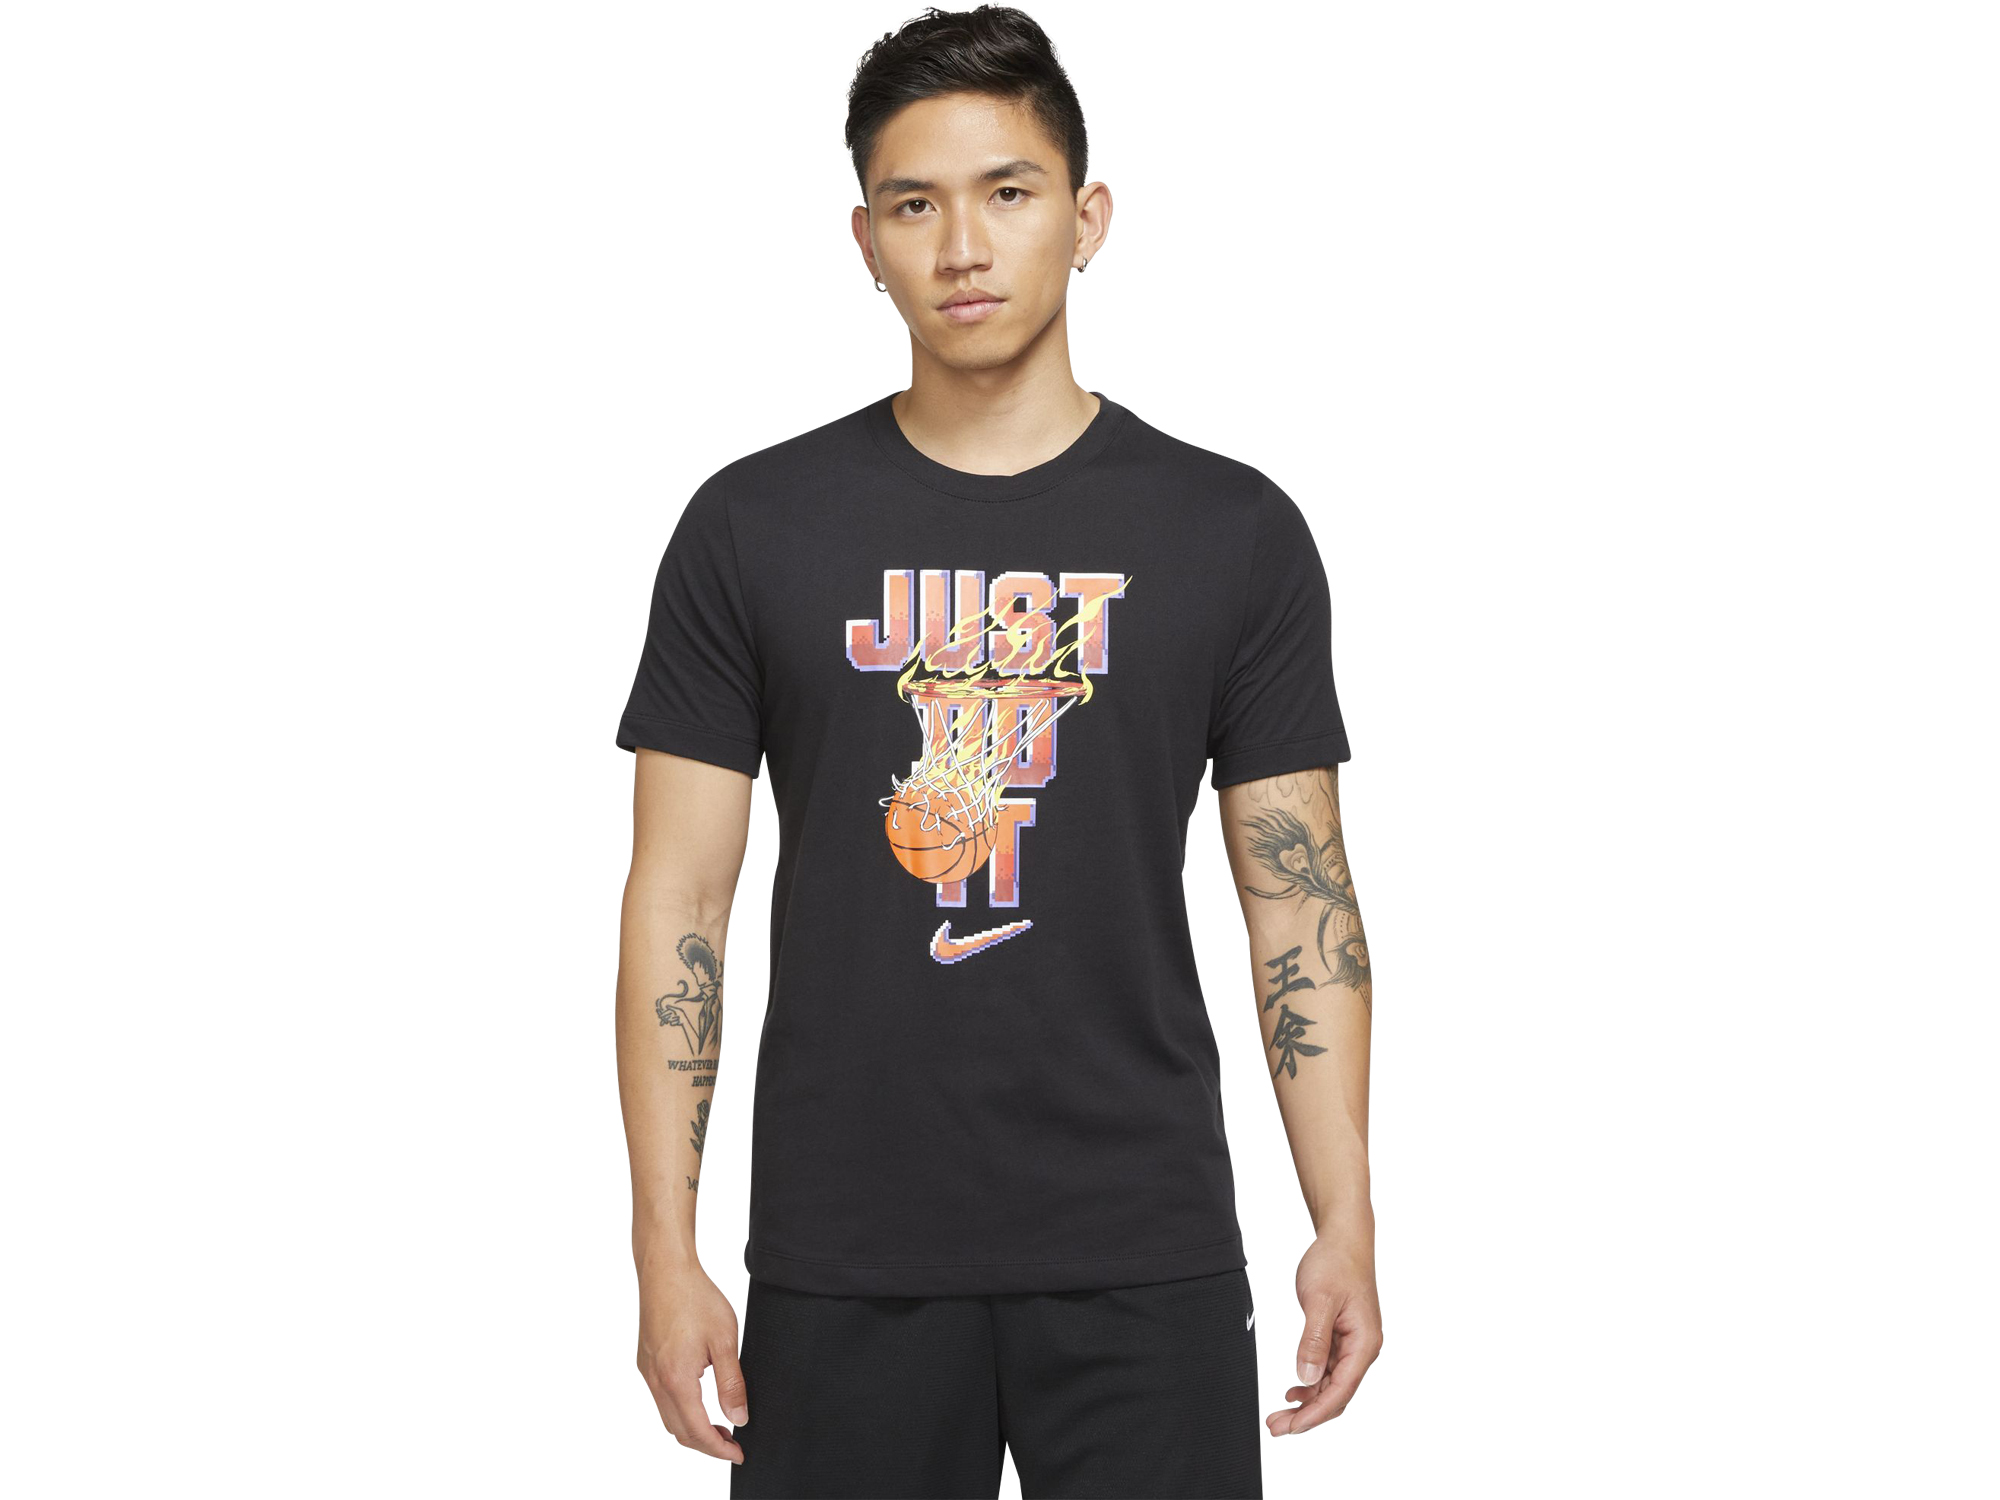 Nike "Just Do It" T-Shirt